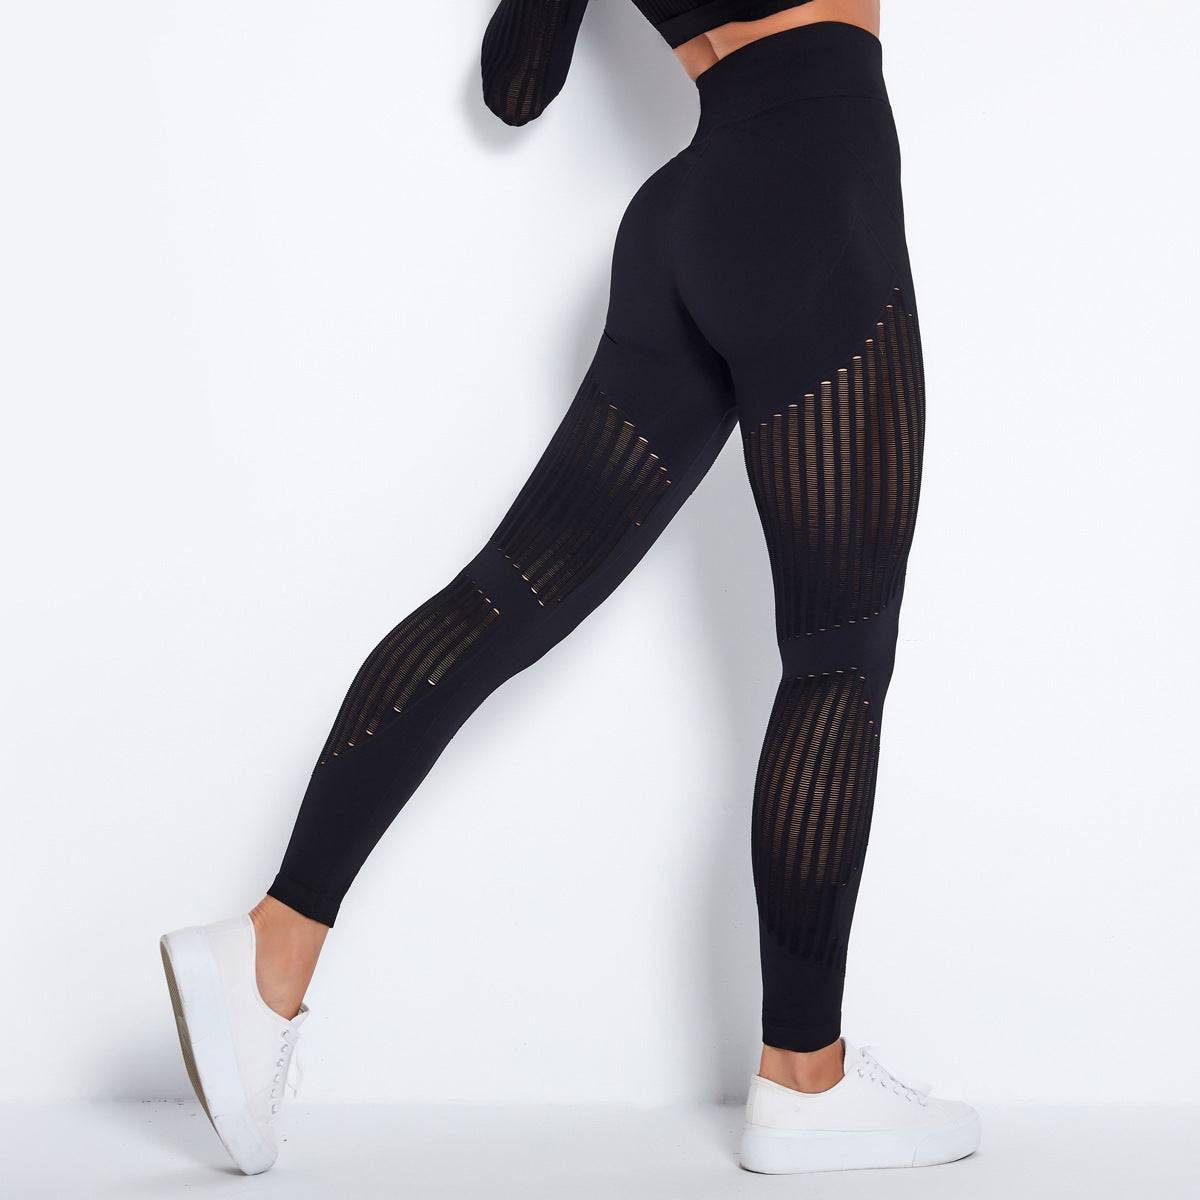 Women's High Waist Yoga Pants with Thigh Rise